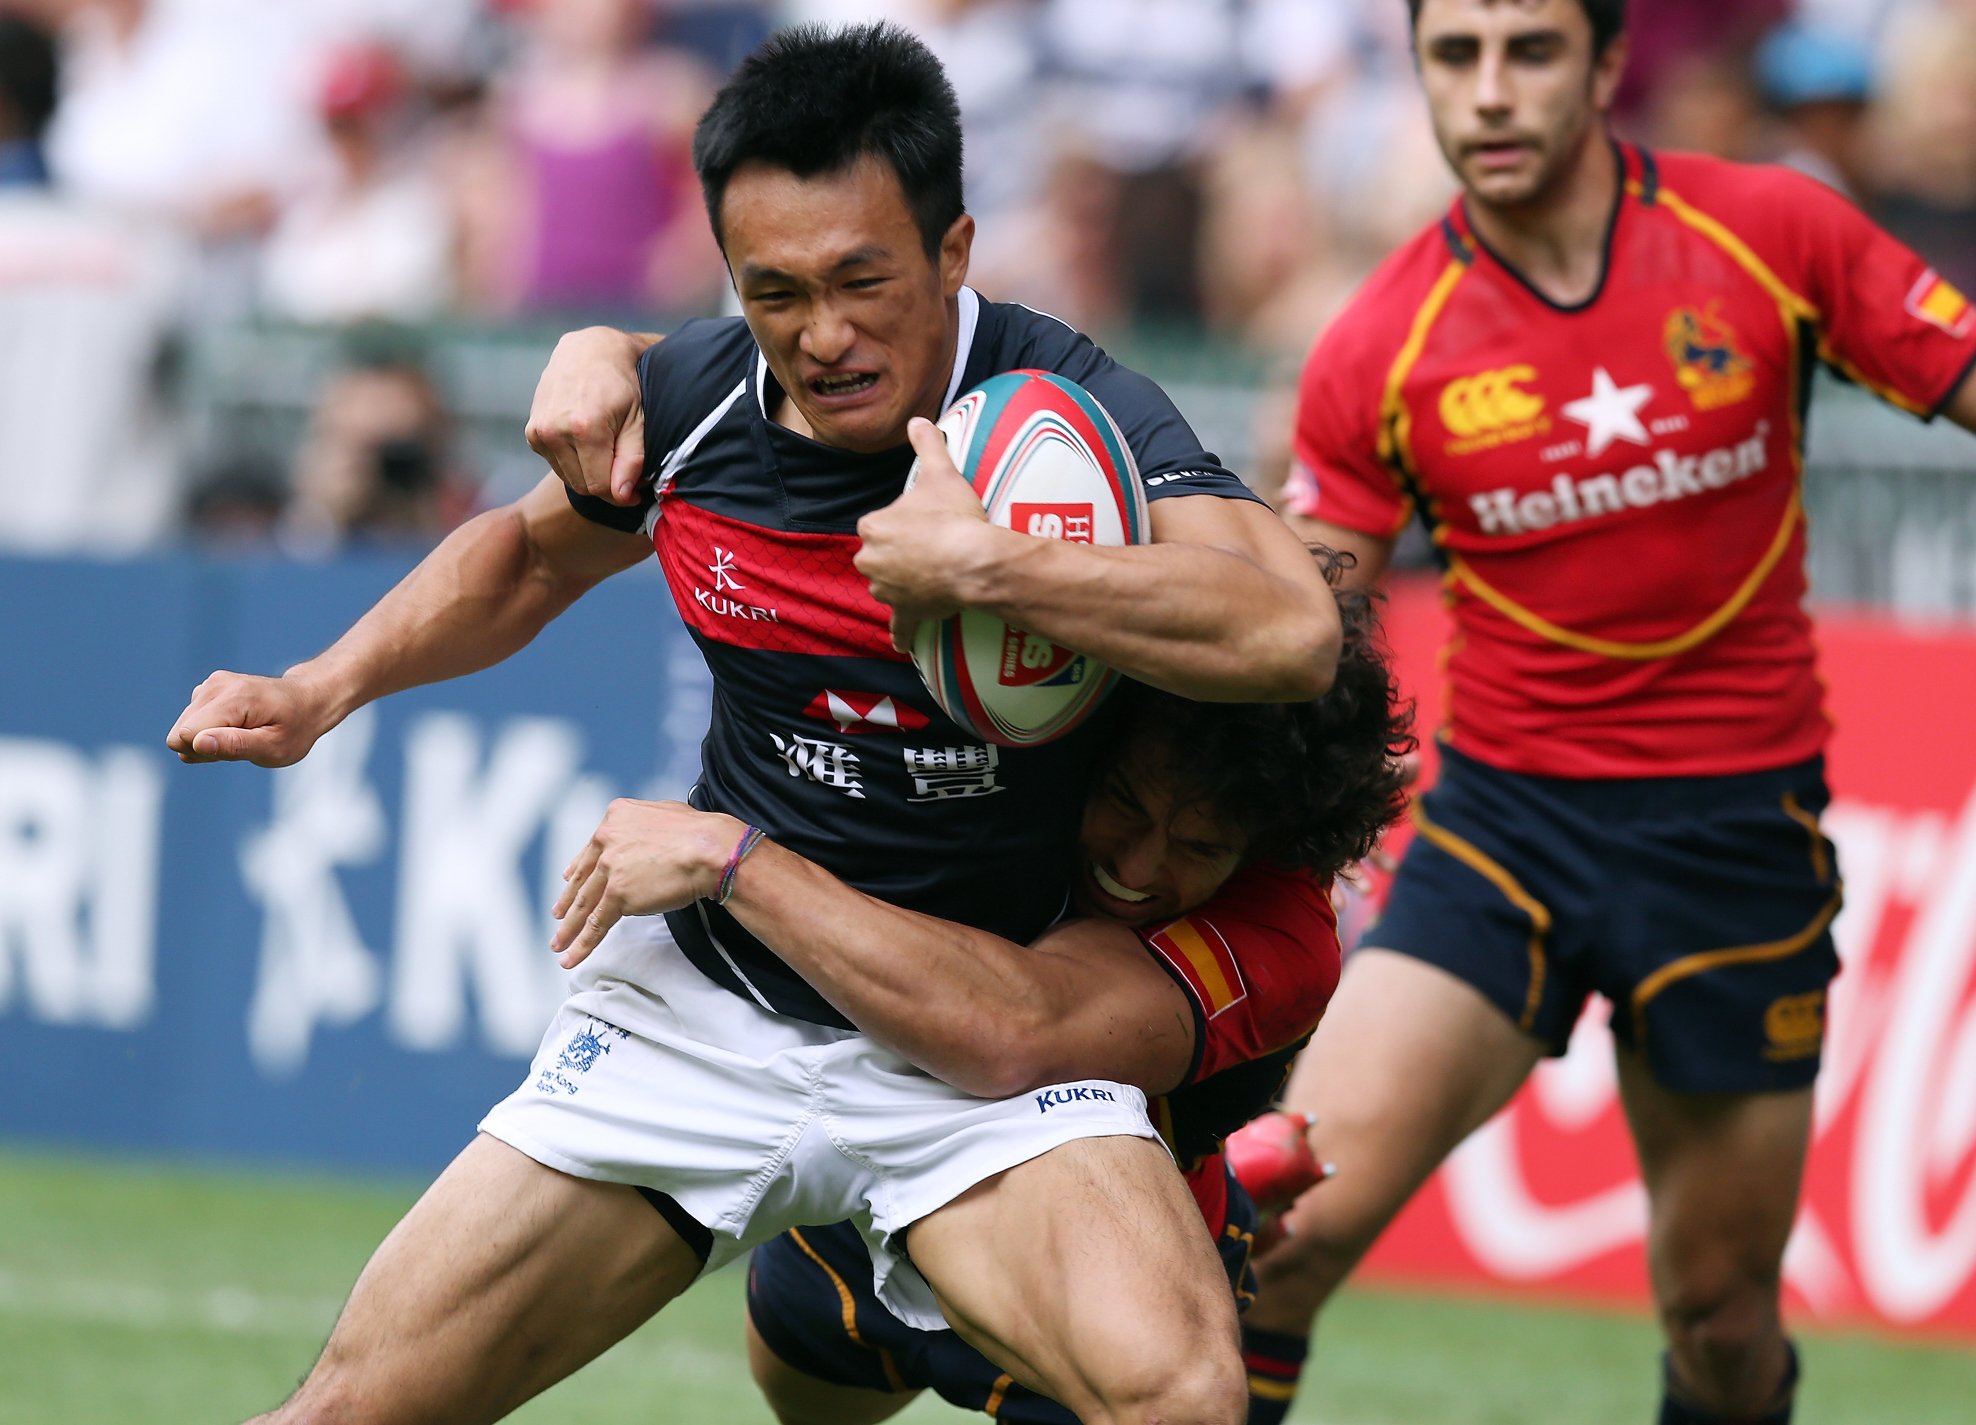 Salom Yiu Kam-shing is among many players in the Hong Kong sevens squad to resume league matches on Saturday. Photo: SCMP